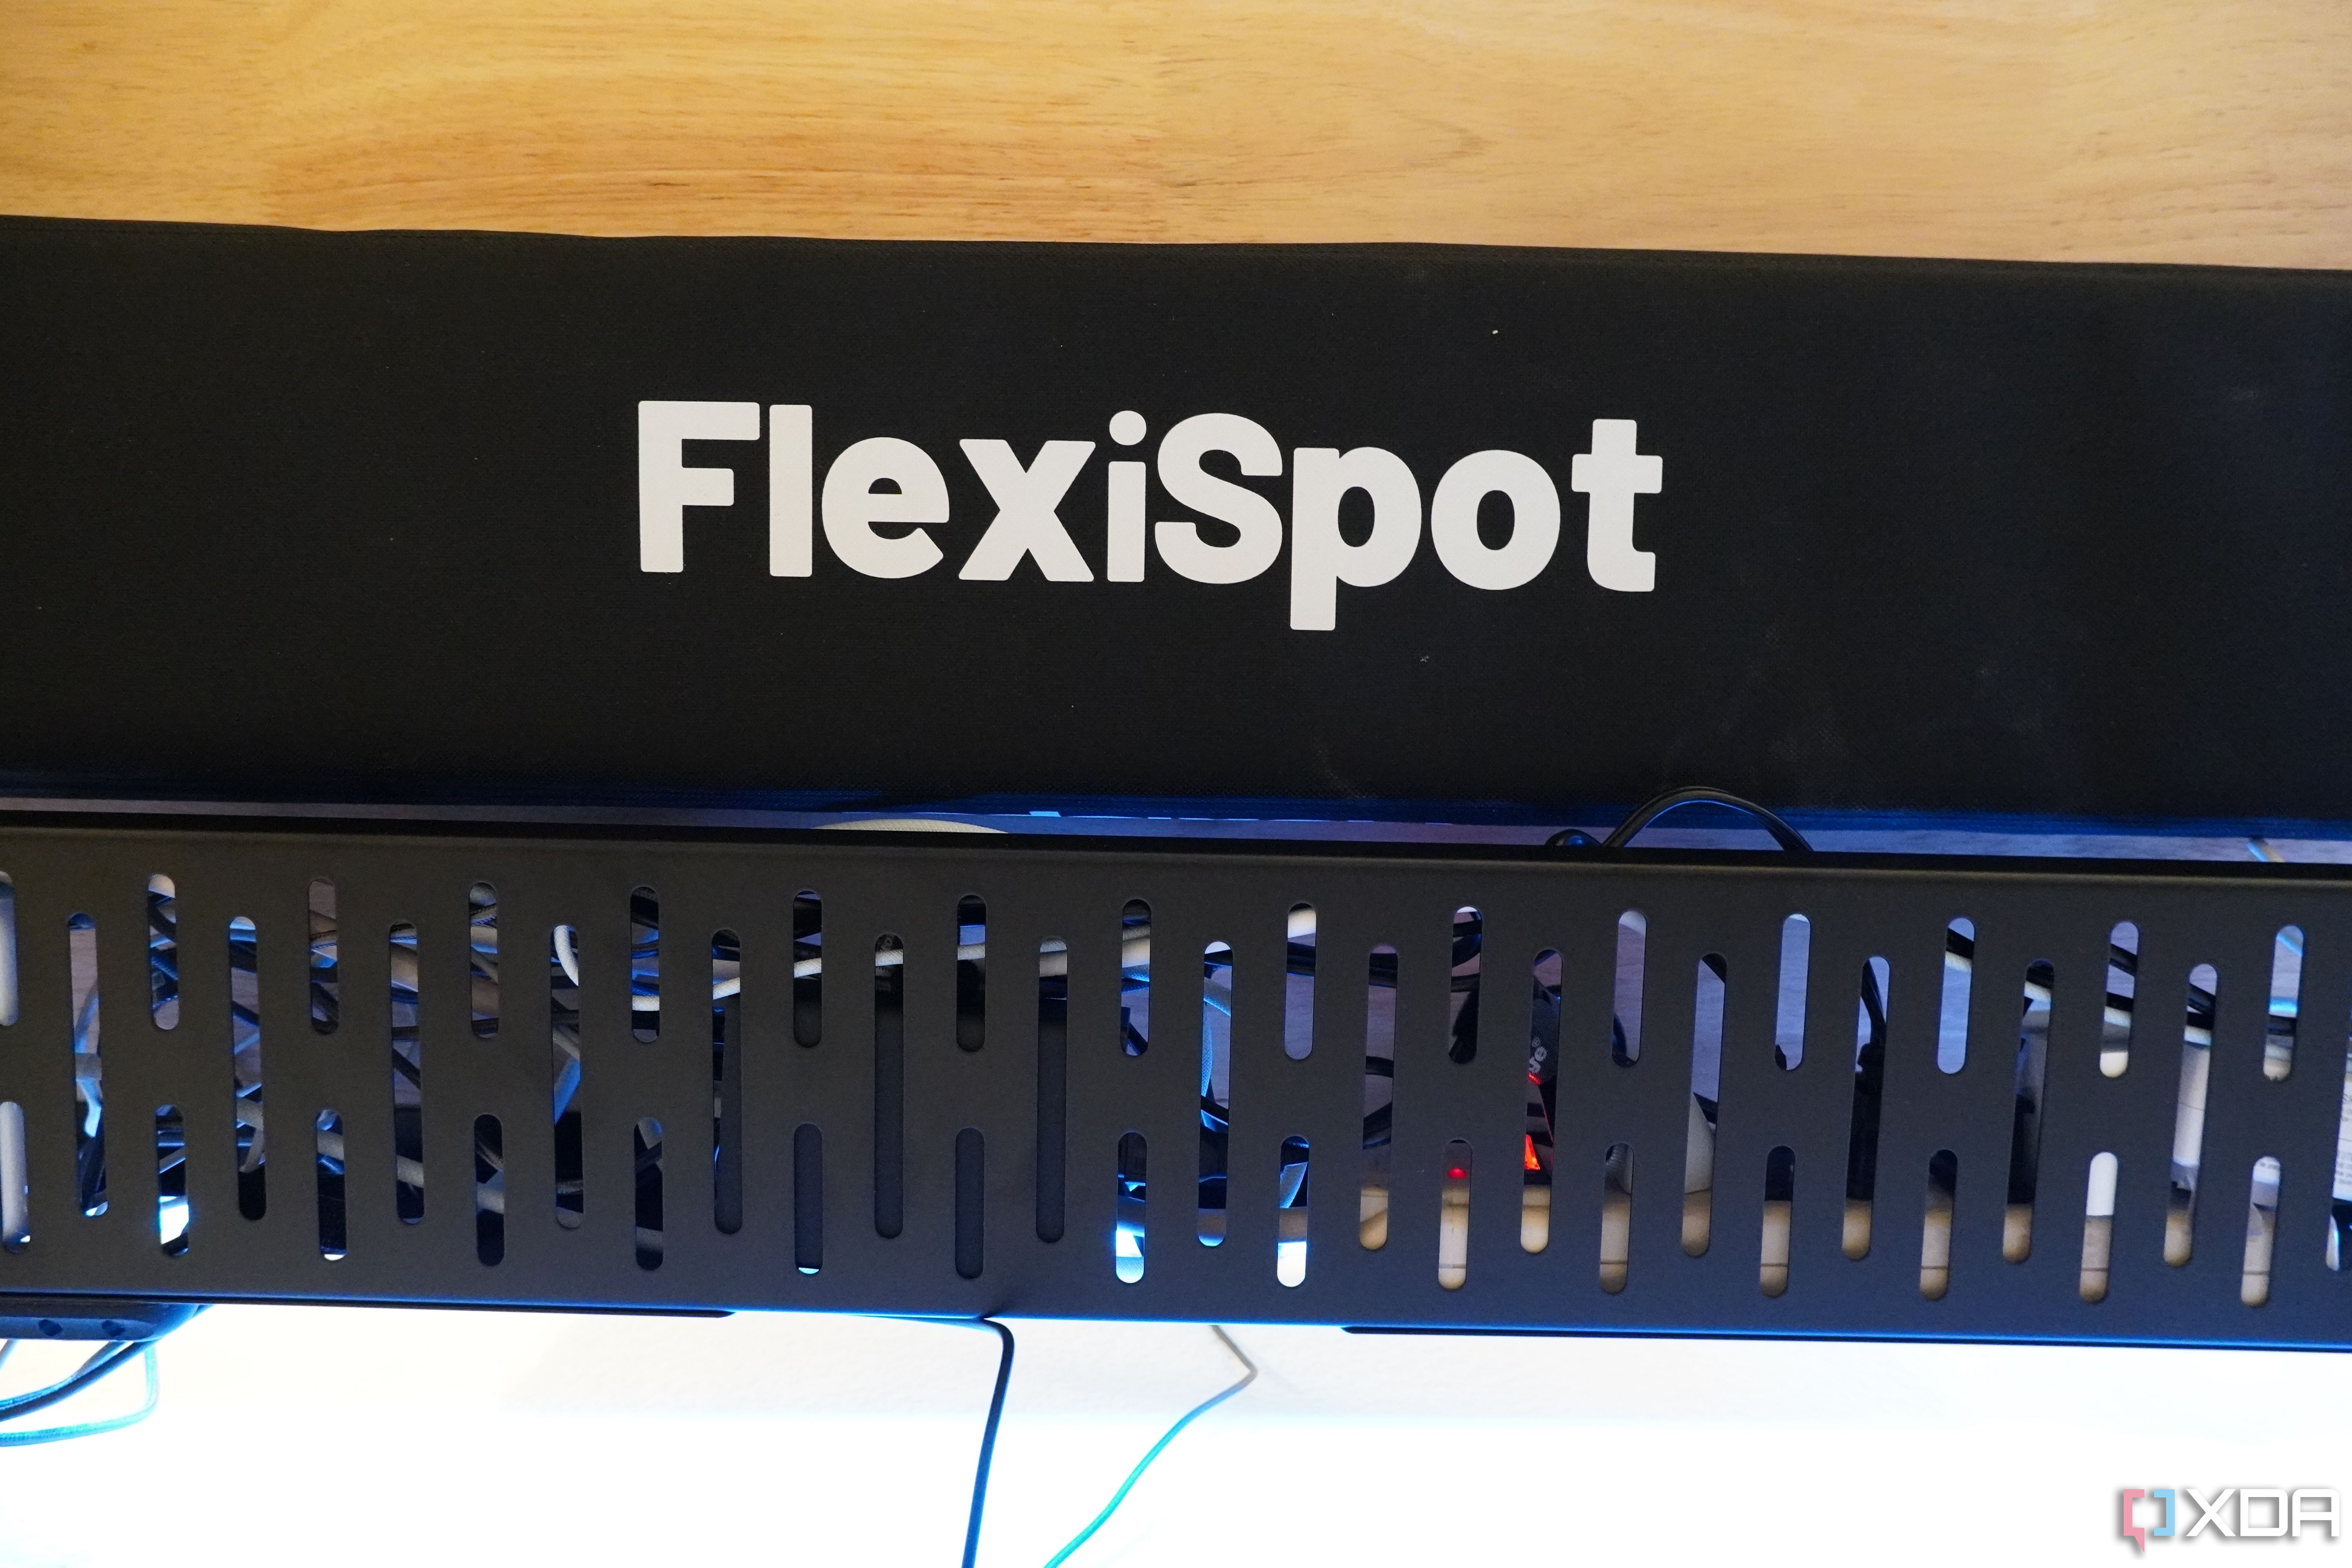 The FlexiSpot cable management tray and sleeve.